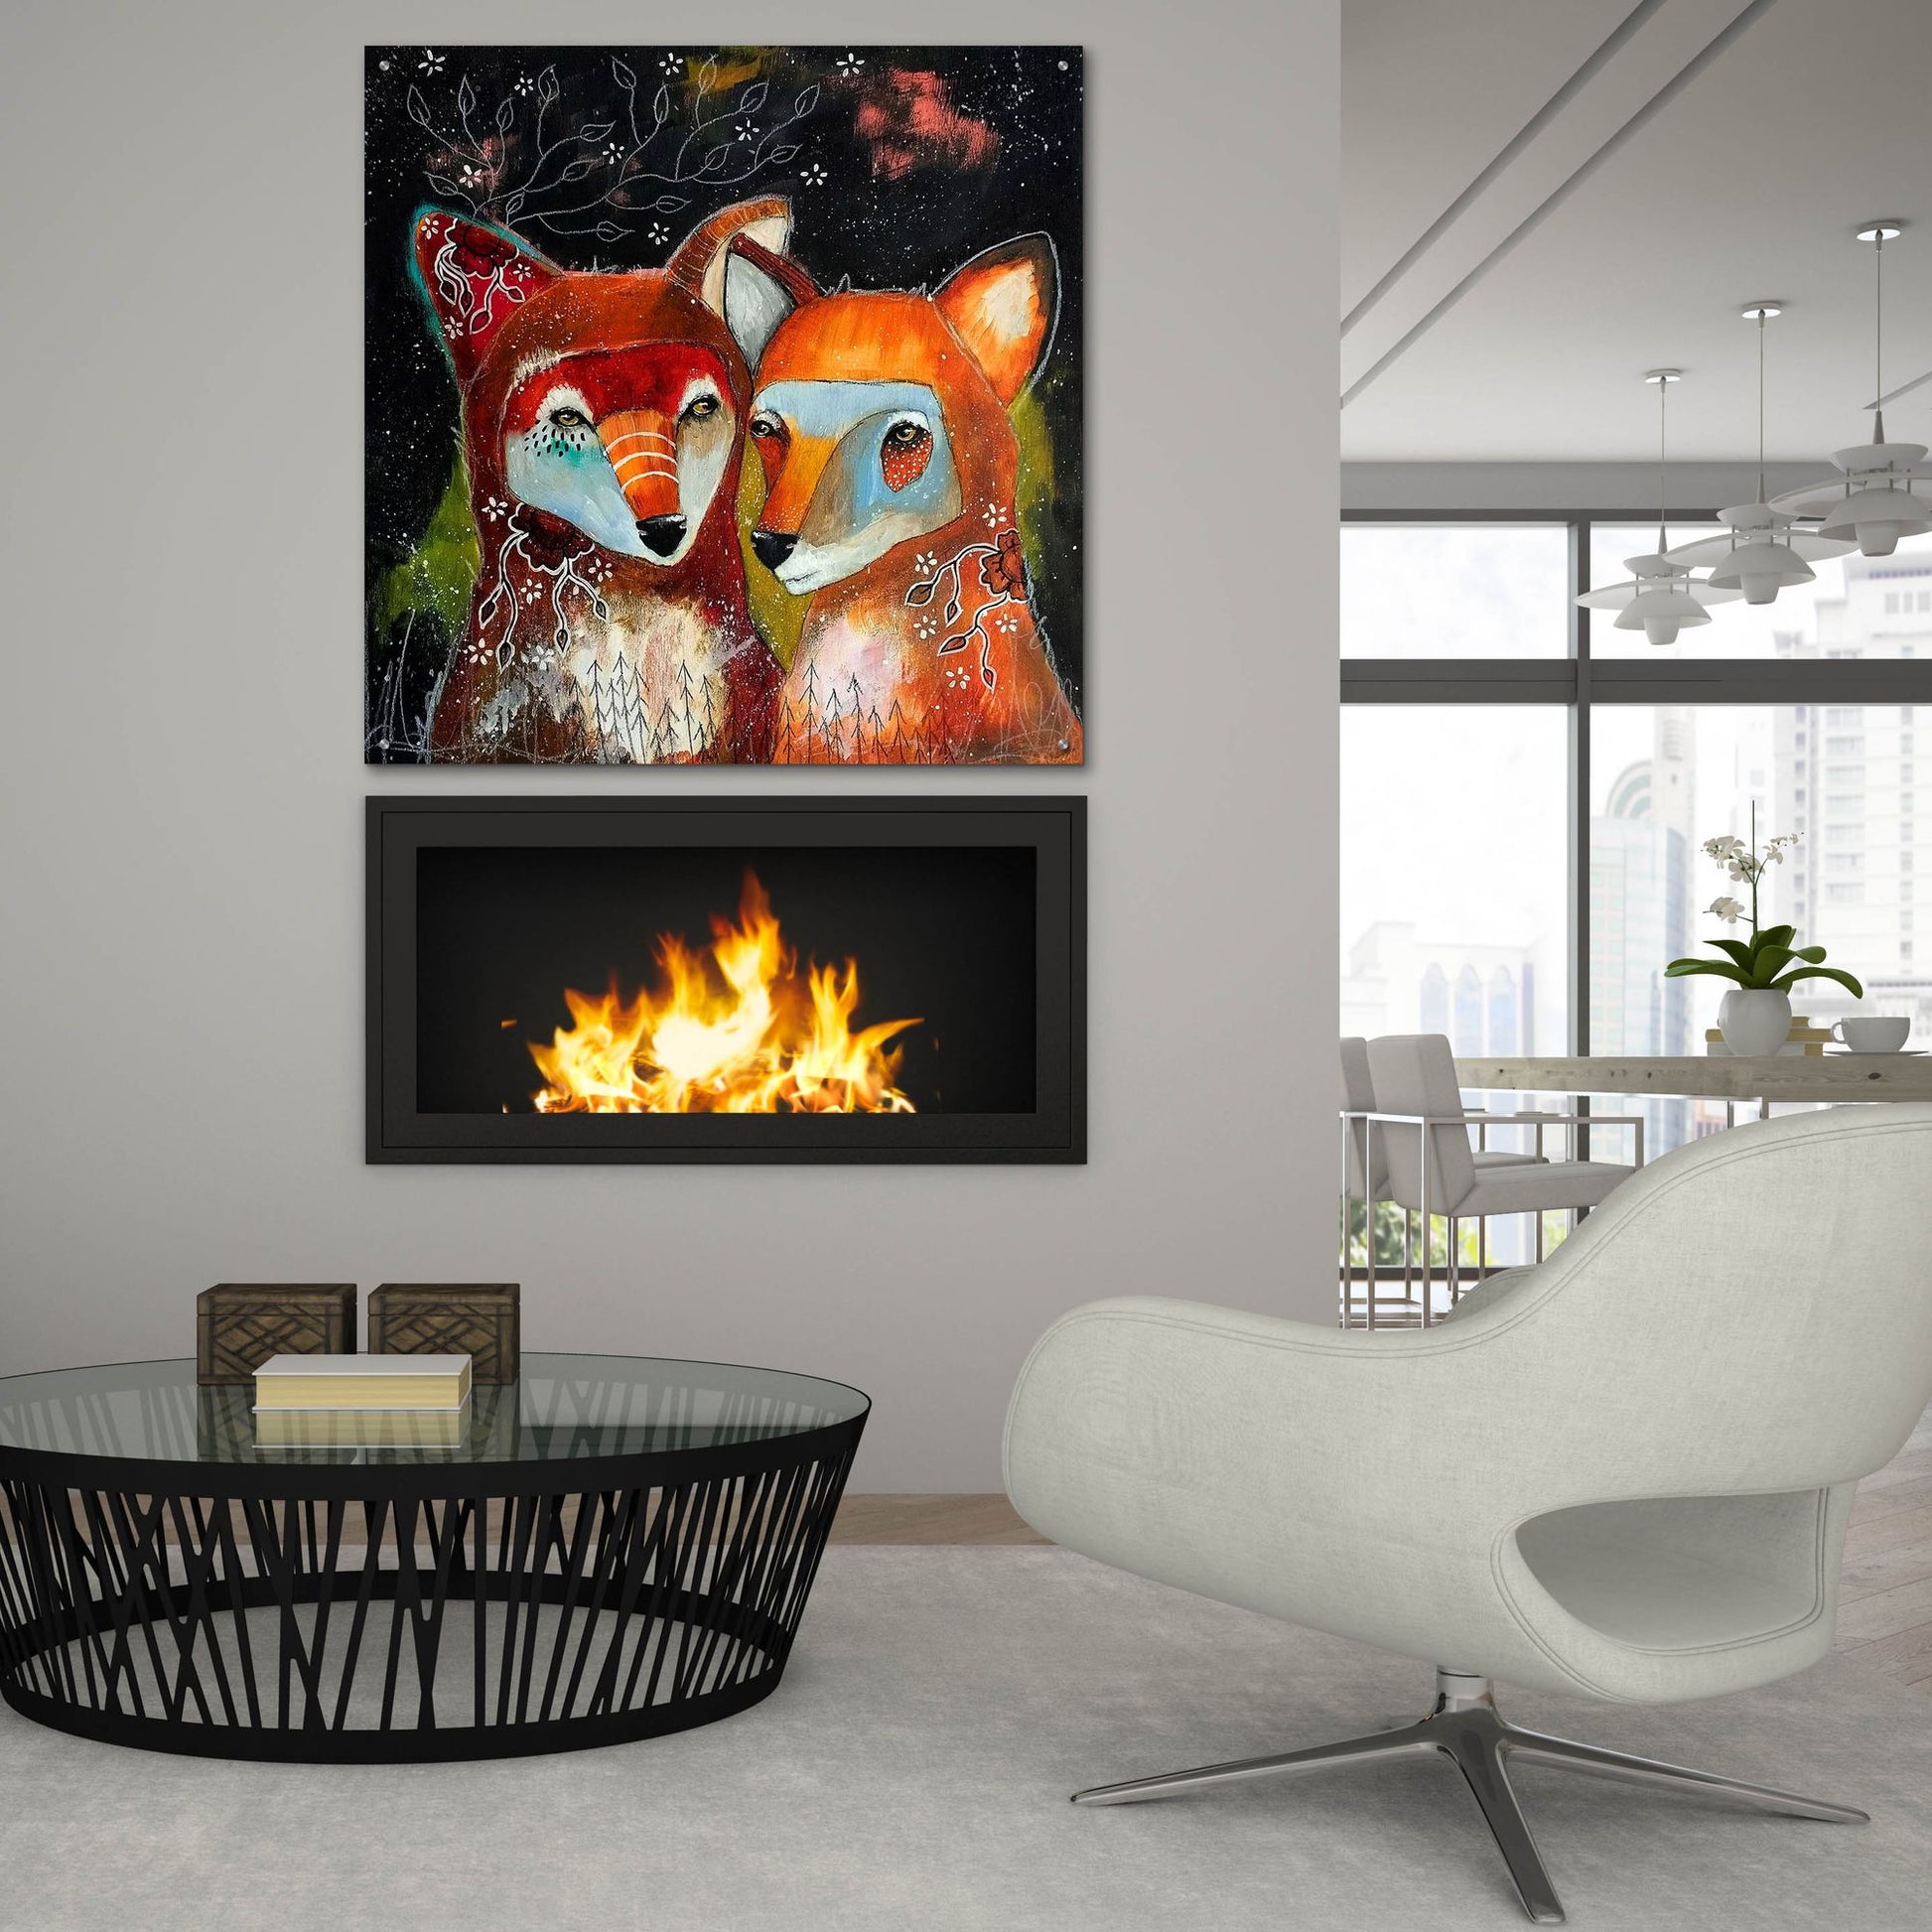 Epic Art 'Home Is Wherever You Are' by The Secret Hermit, Acrylic Glass Wall Art,36x36